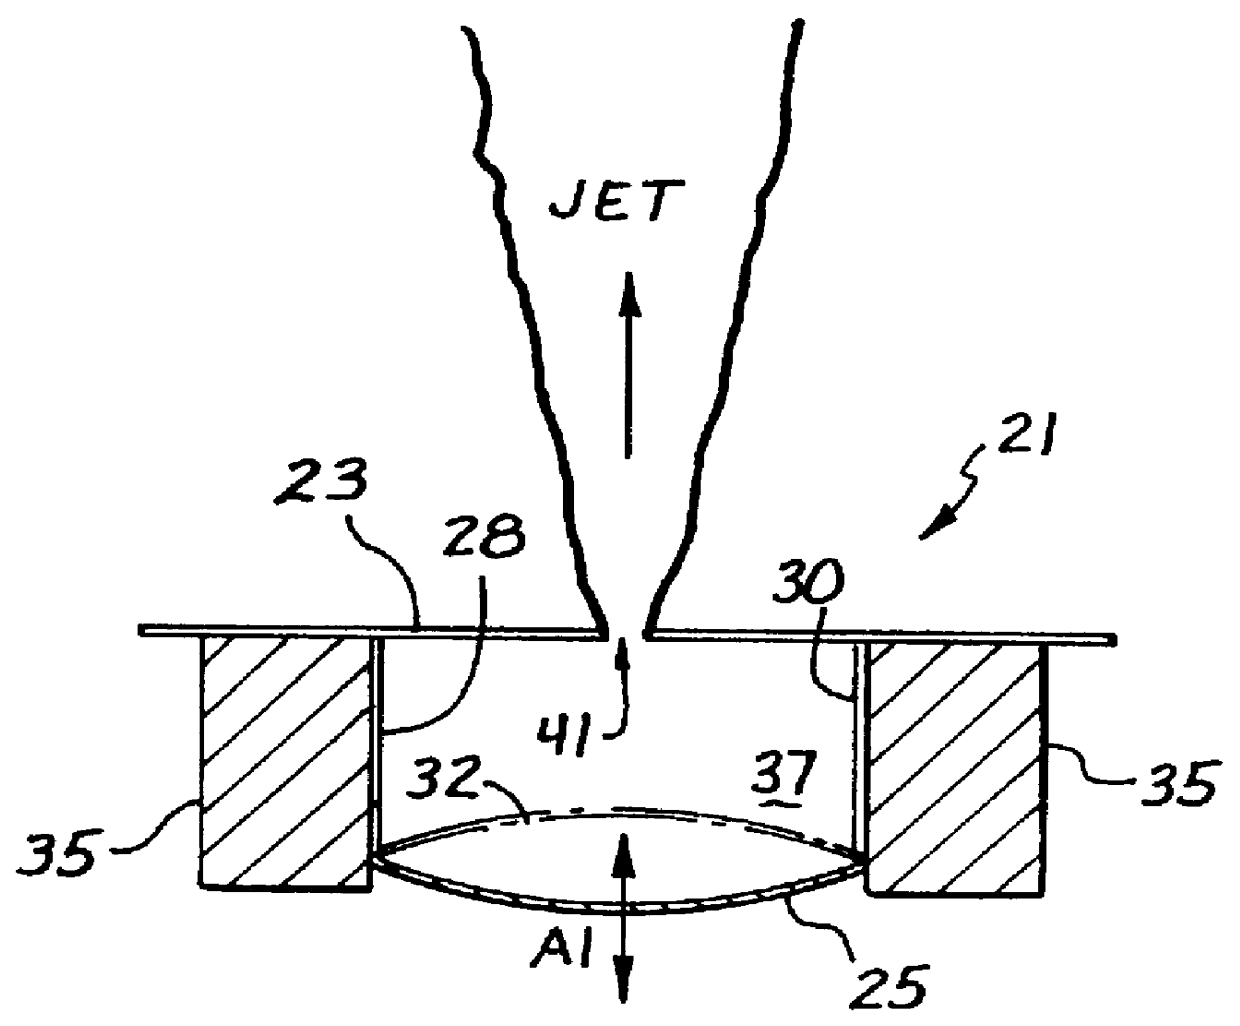 Oscillating air jets for helicopter rotor aerodynamic control and BVI noise reduction